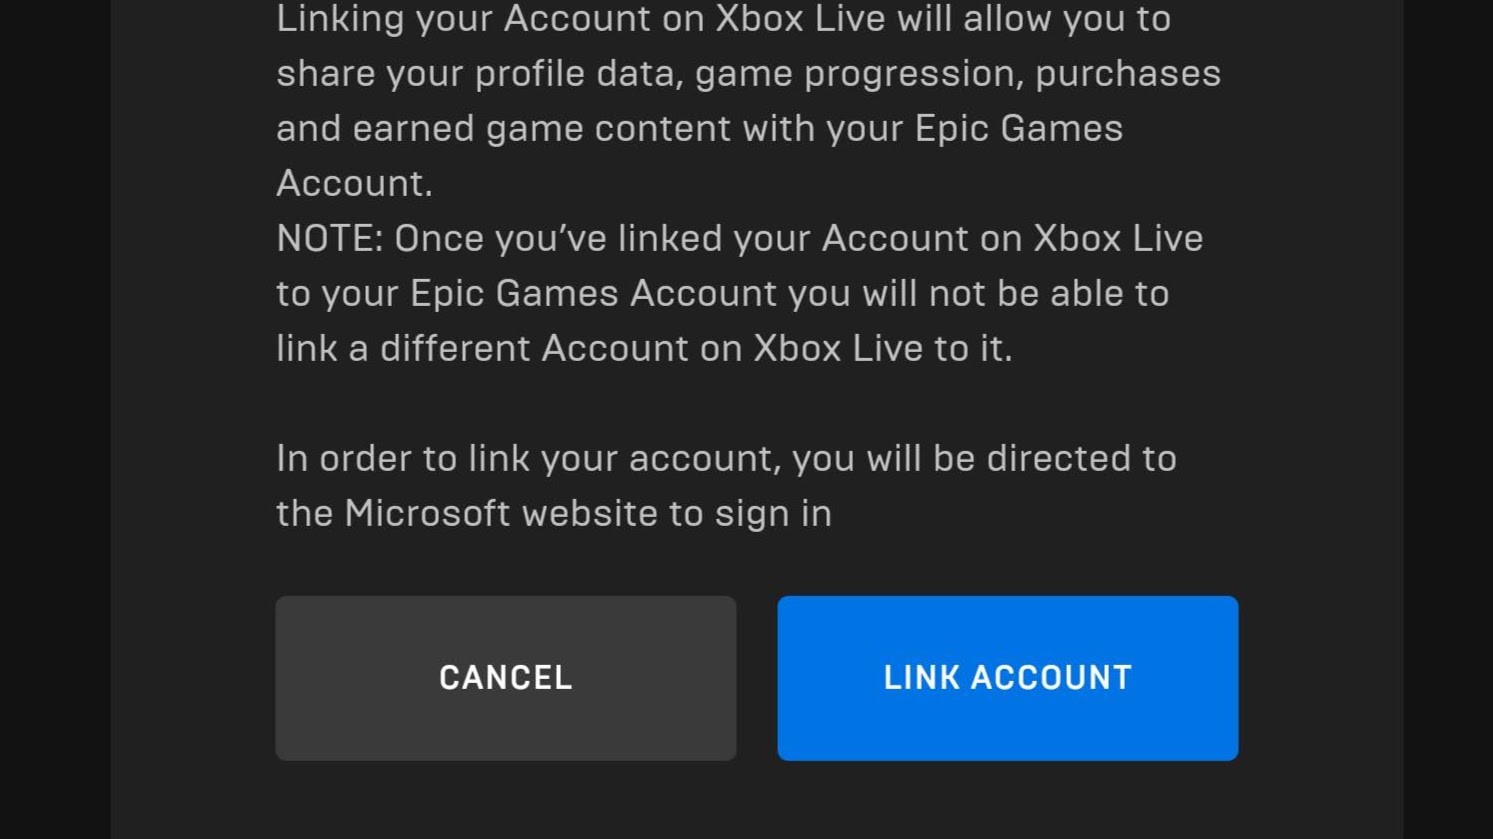 A box asking you to link your Xbox Live account to an Epic Games account